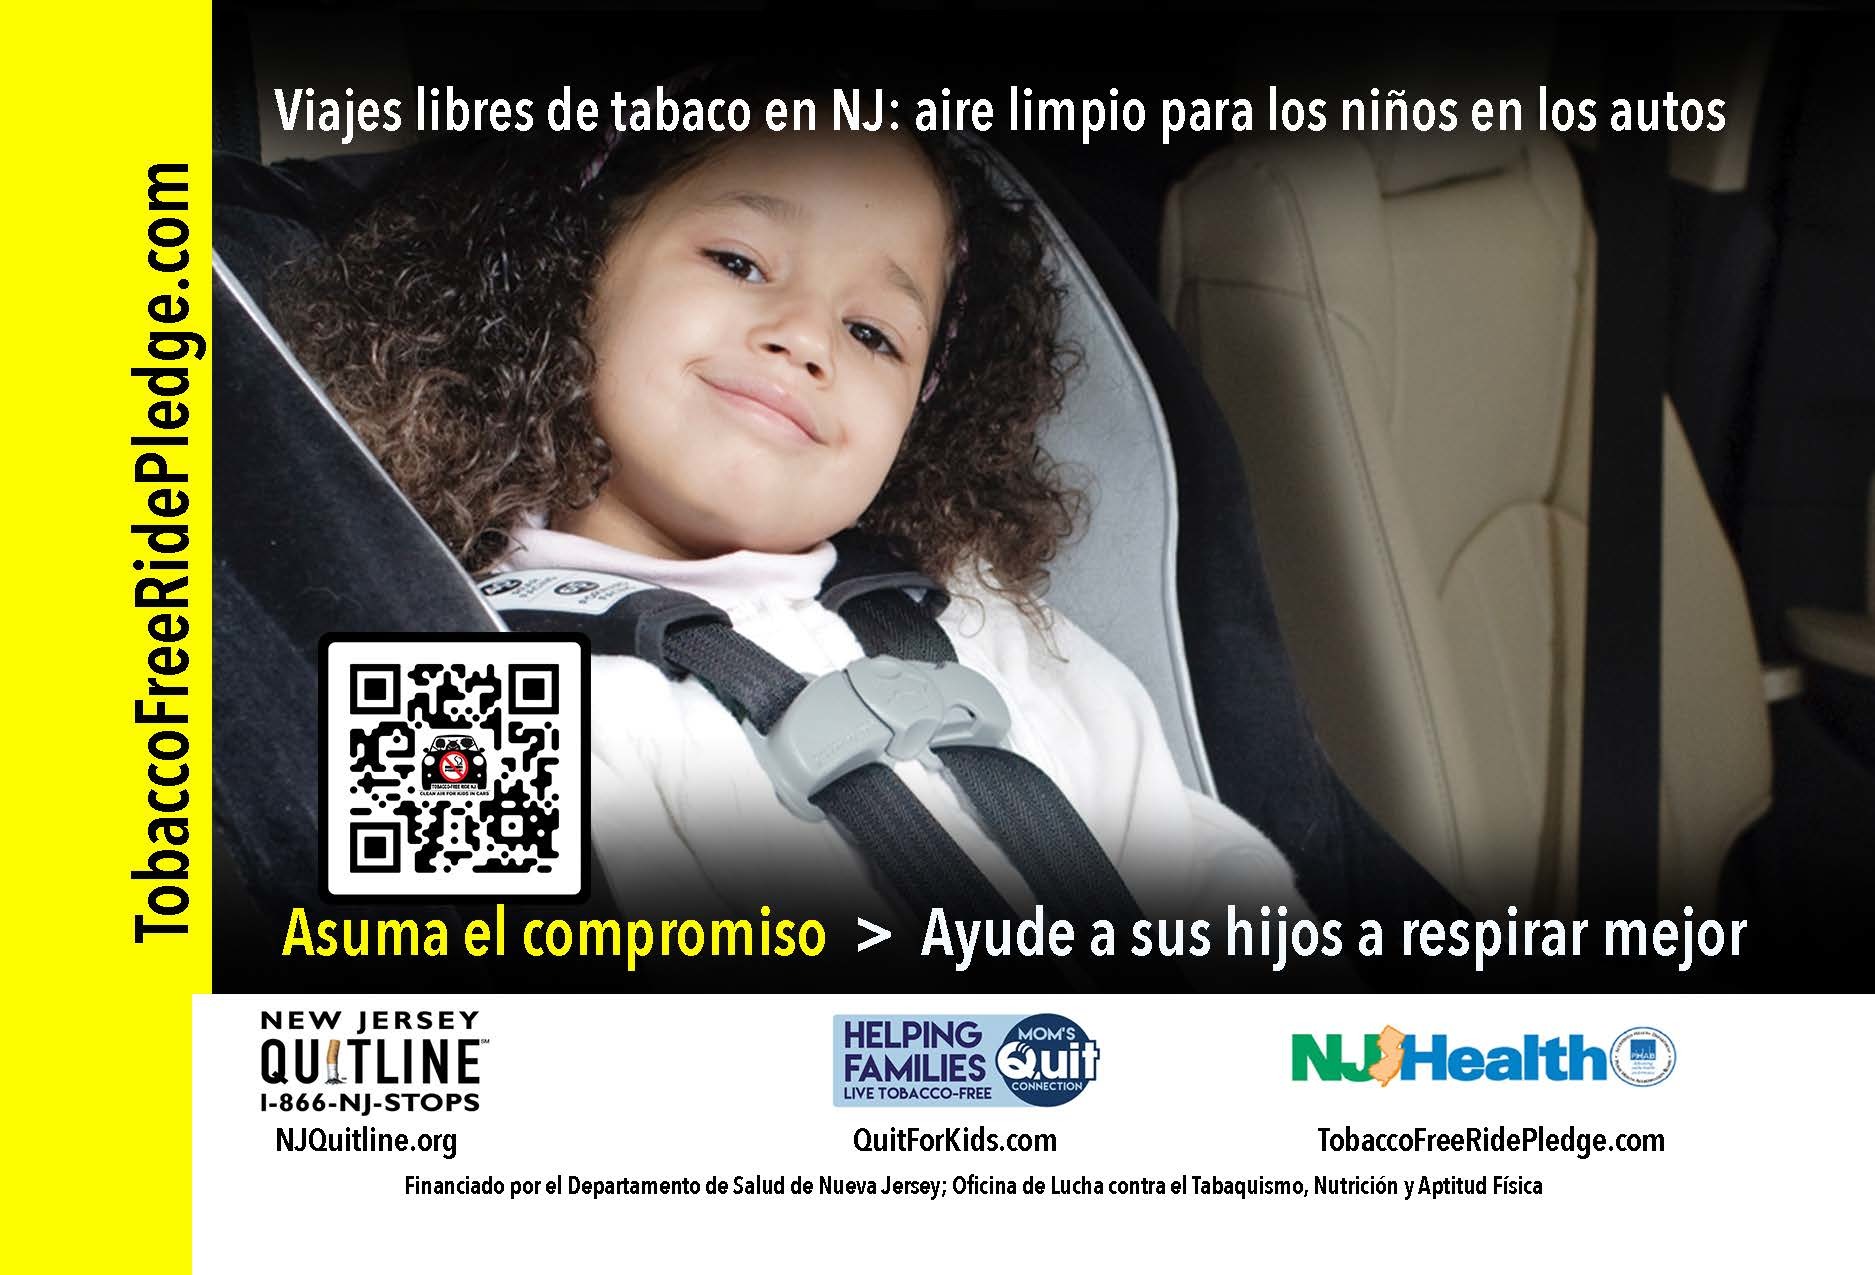 Tobacco-Free Ride NJ: Clean Air for Kids in Cars postcard (Spanish)